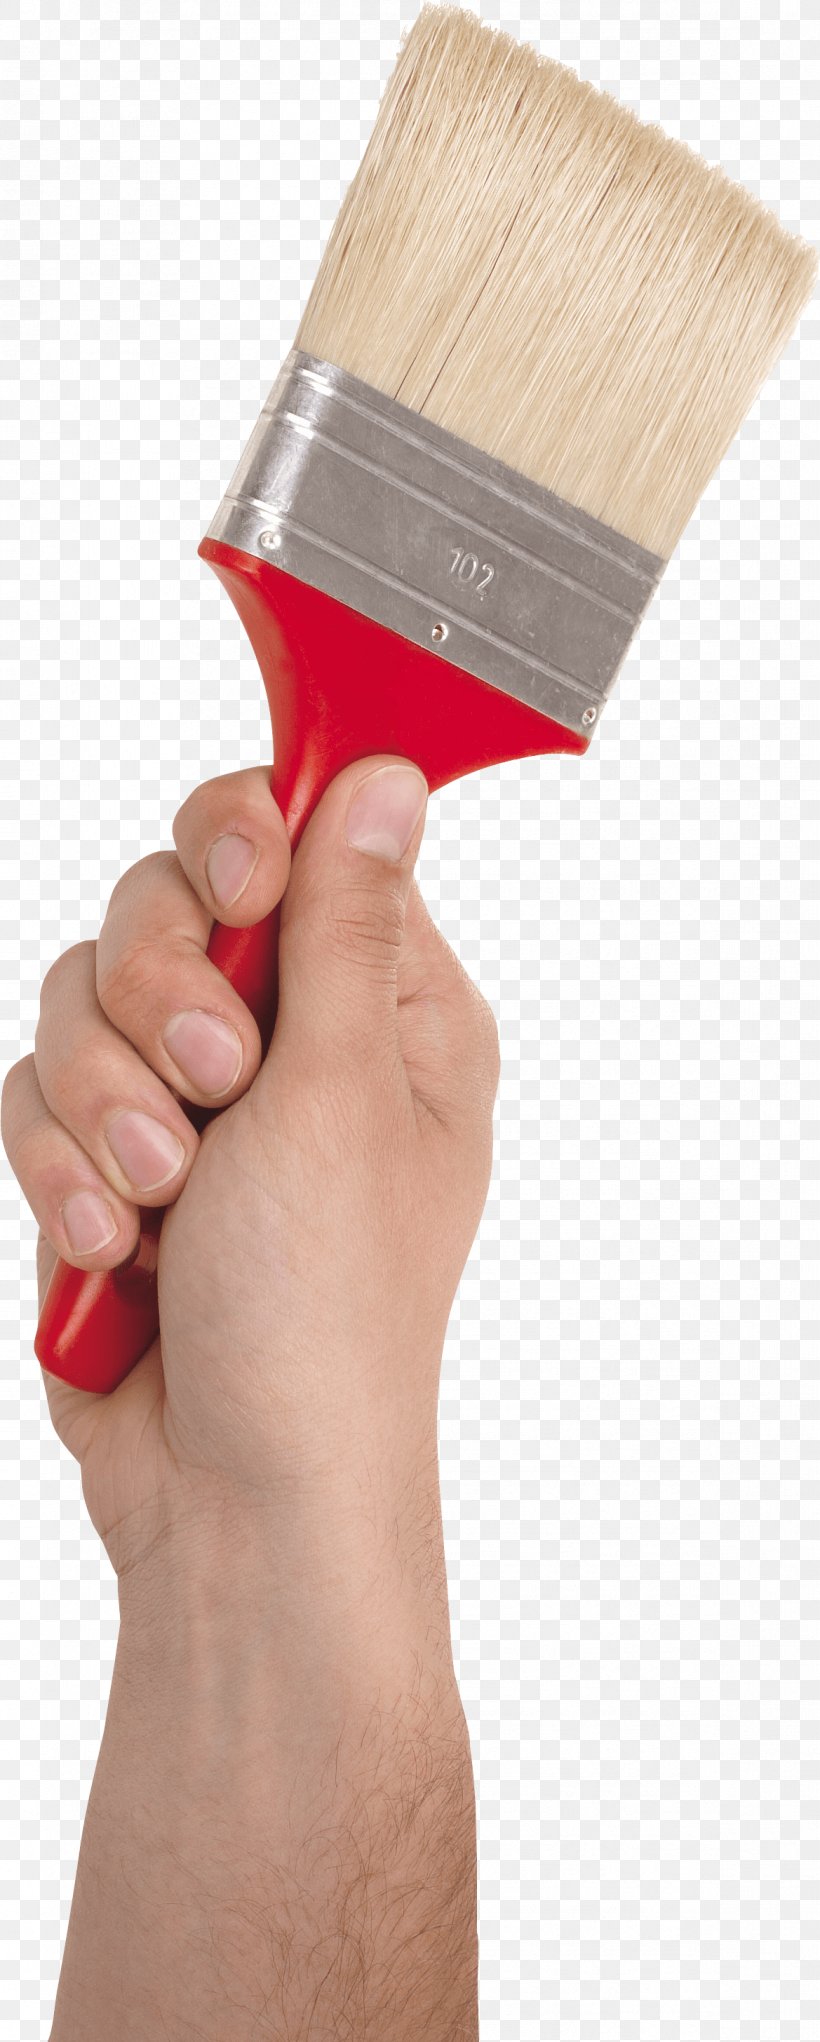 Paint Brush In Hand Image, PNG, 1169x2912px, Brush, Finger, Hand, Paint, Paintbrush Download Free